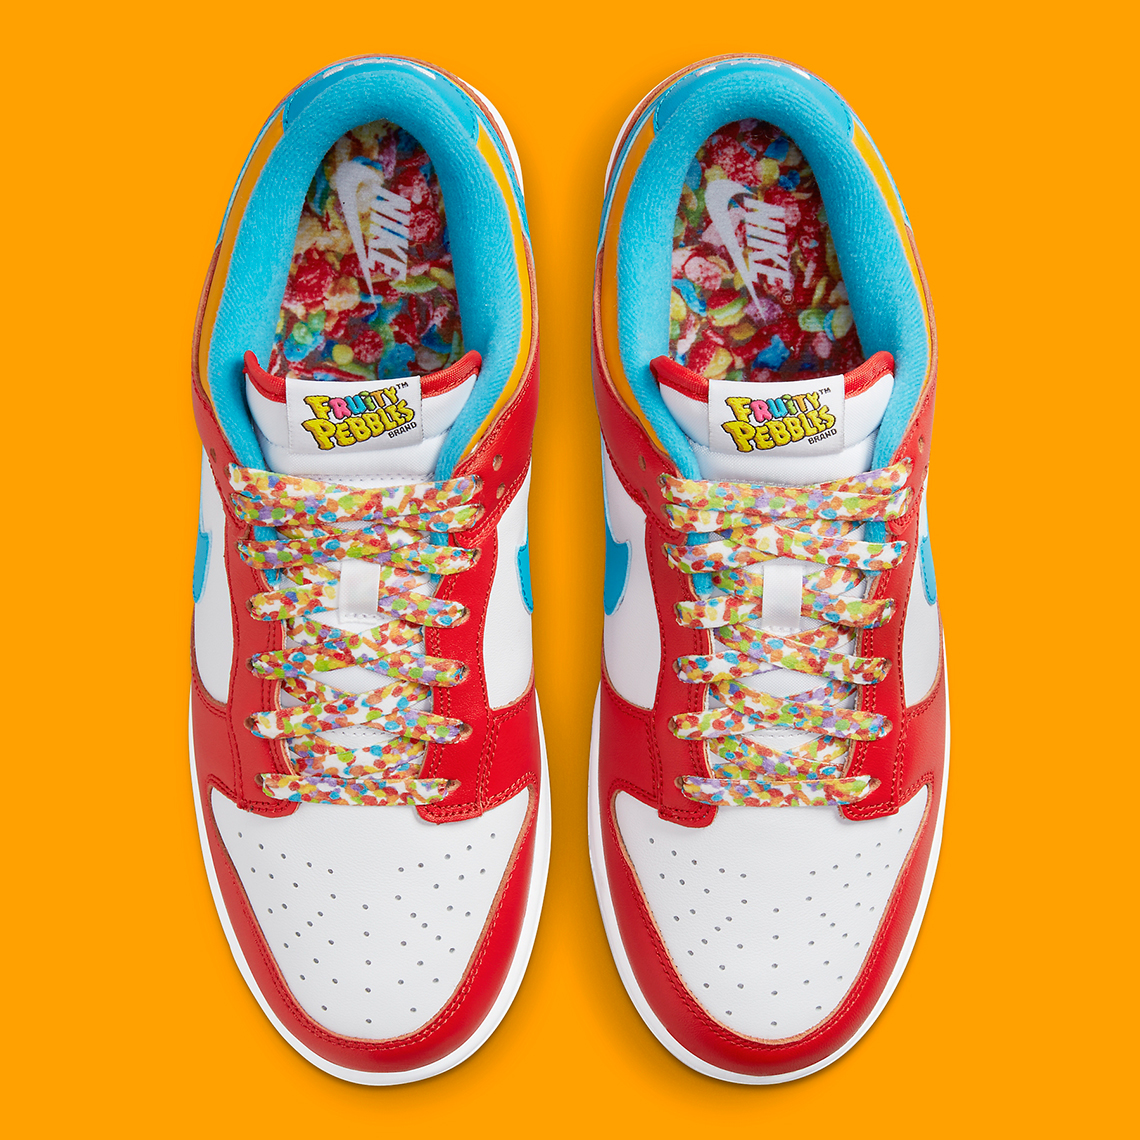 nike dunk low fruity pebbles lebron james dh8009 600 release date 7